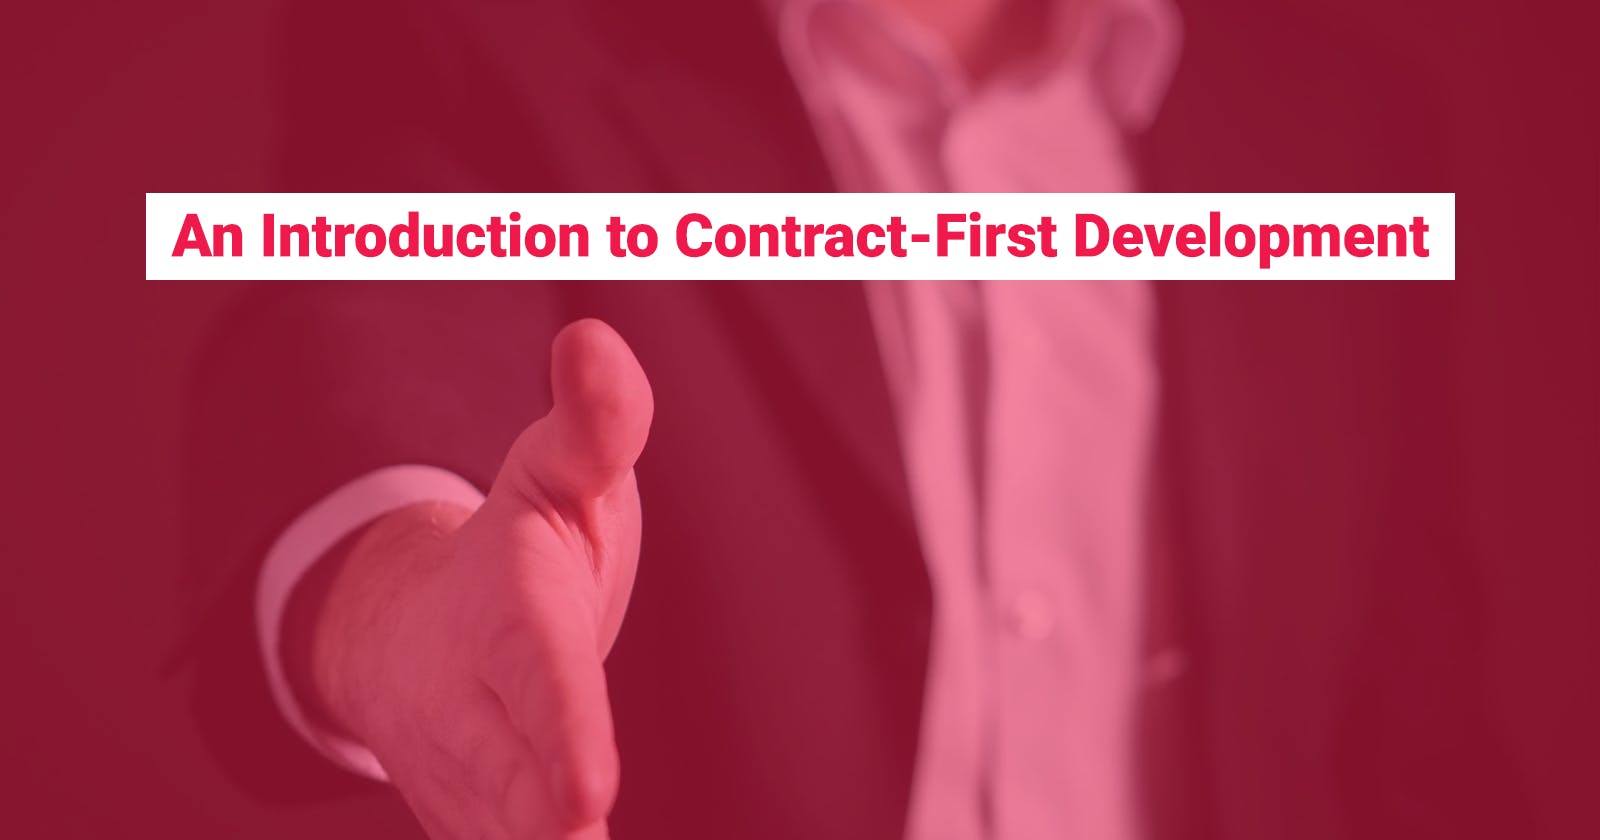 An Introduction to Contract-First Development